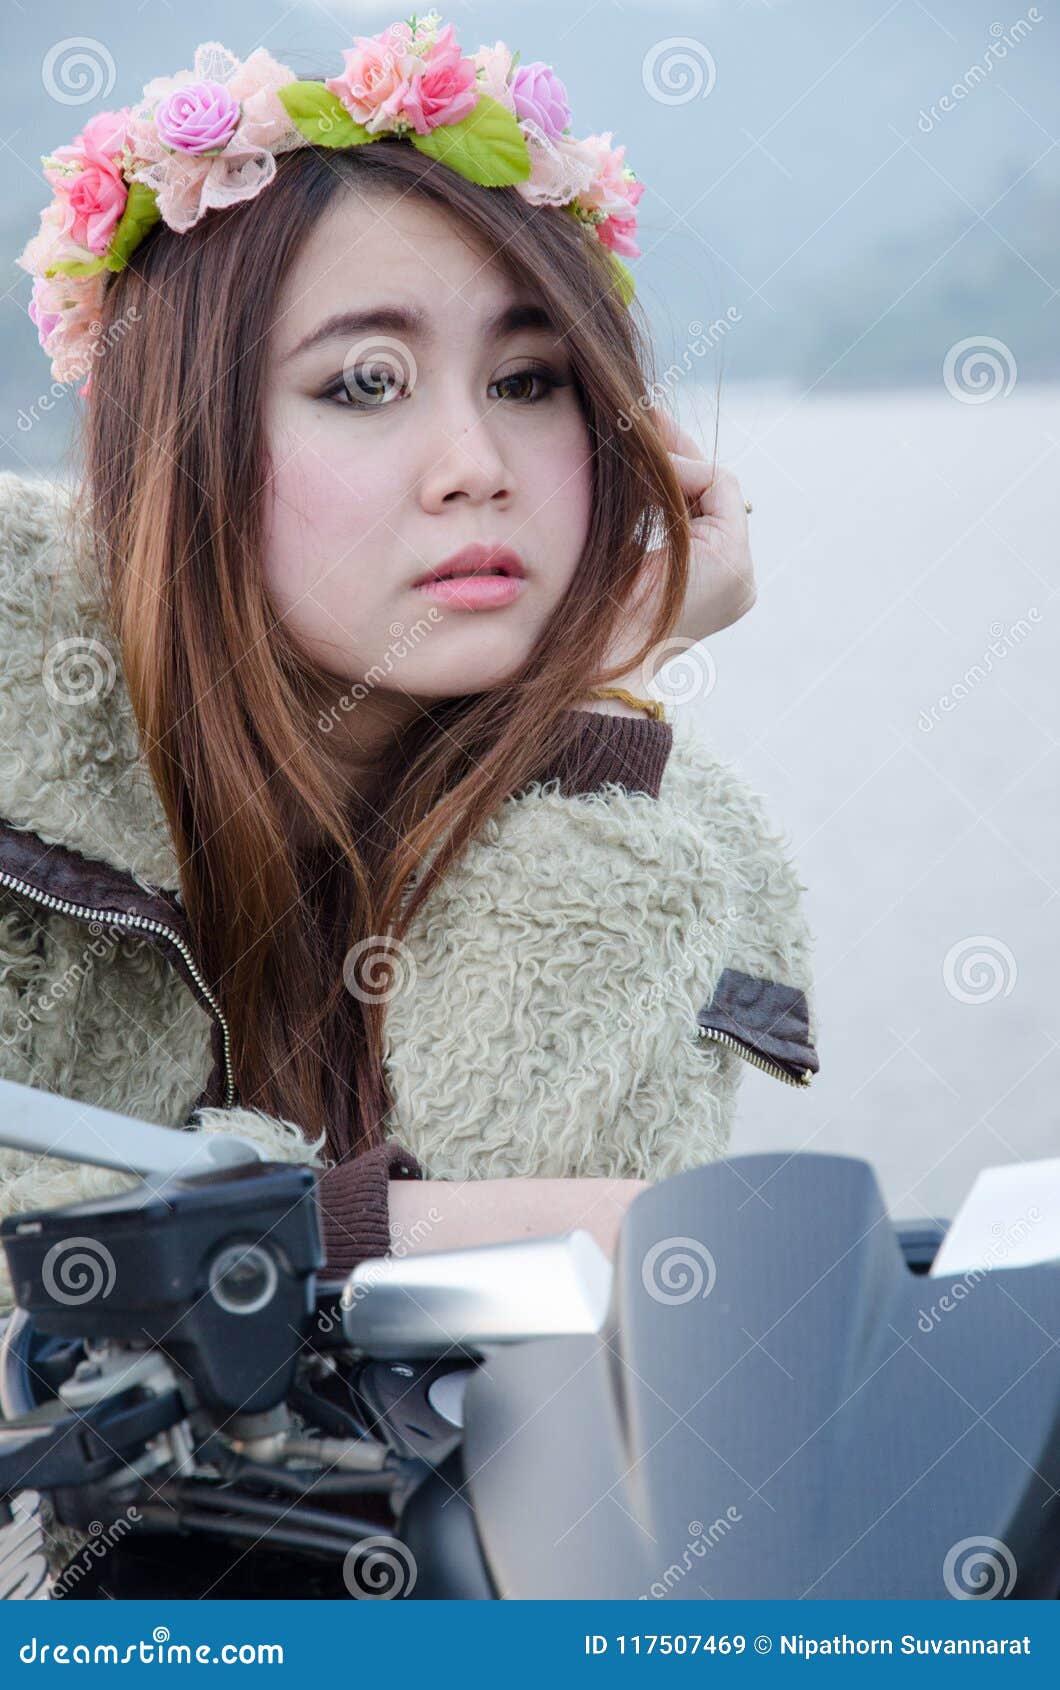 Hot asian girls on motorcycles - Adult gallery